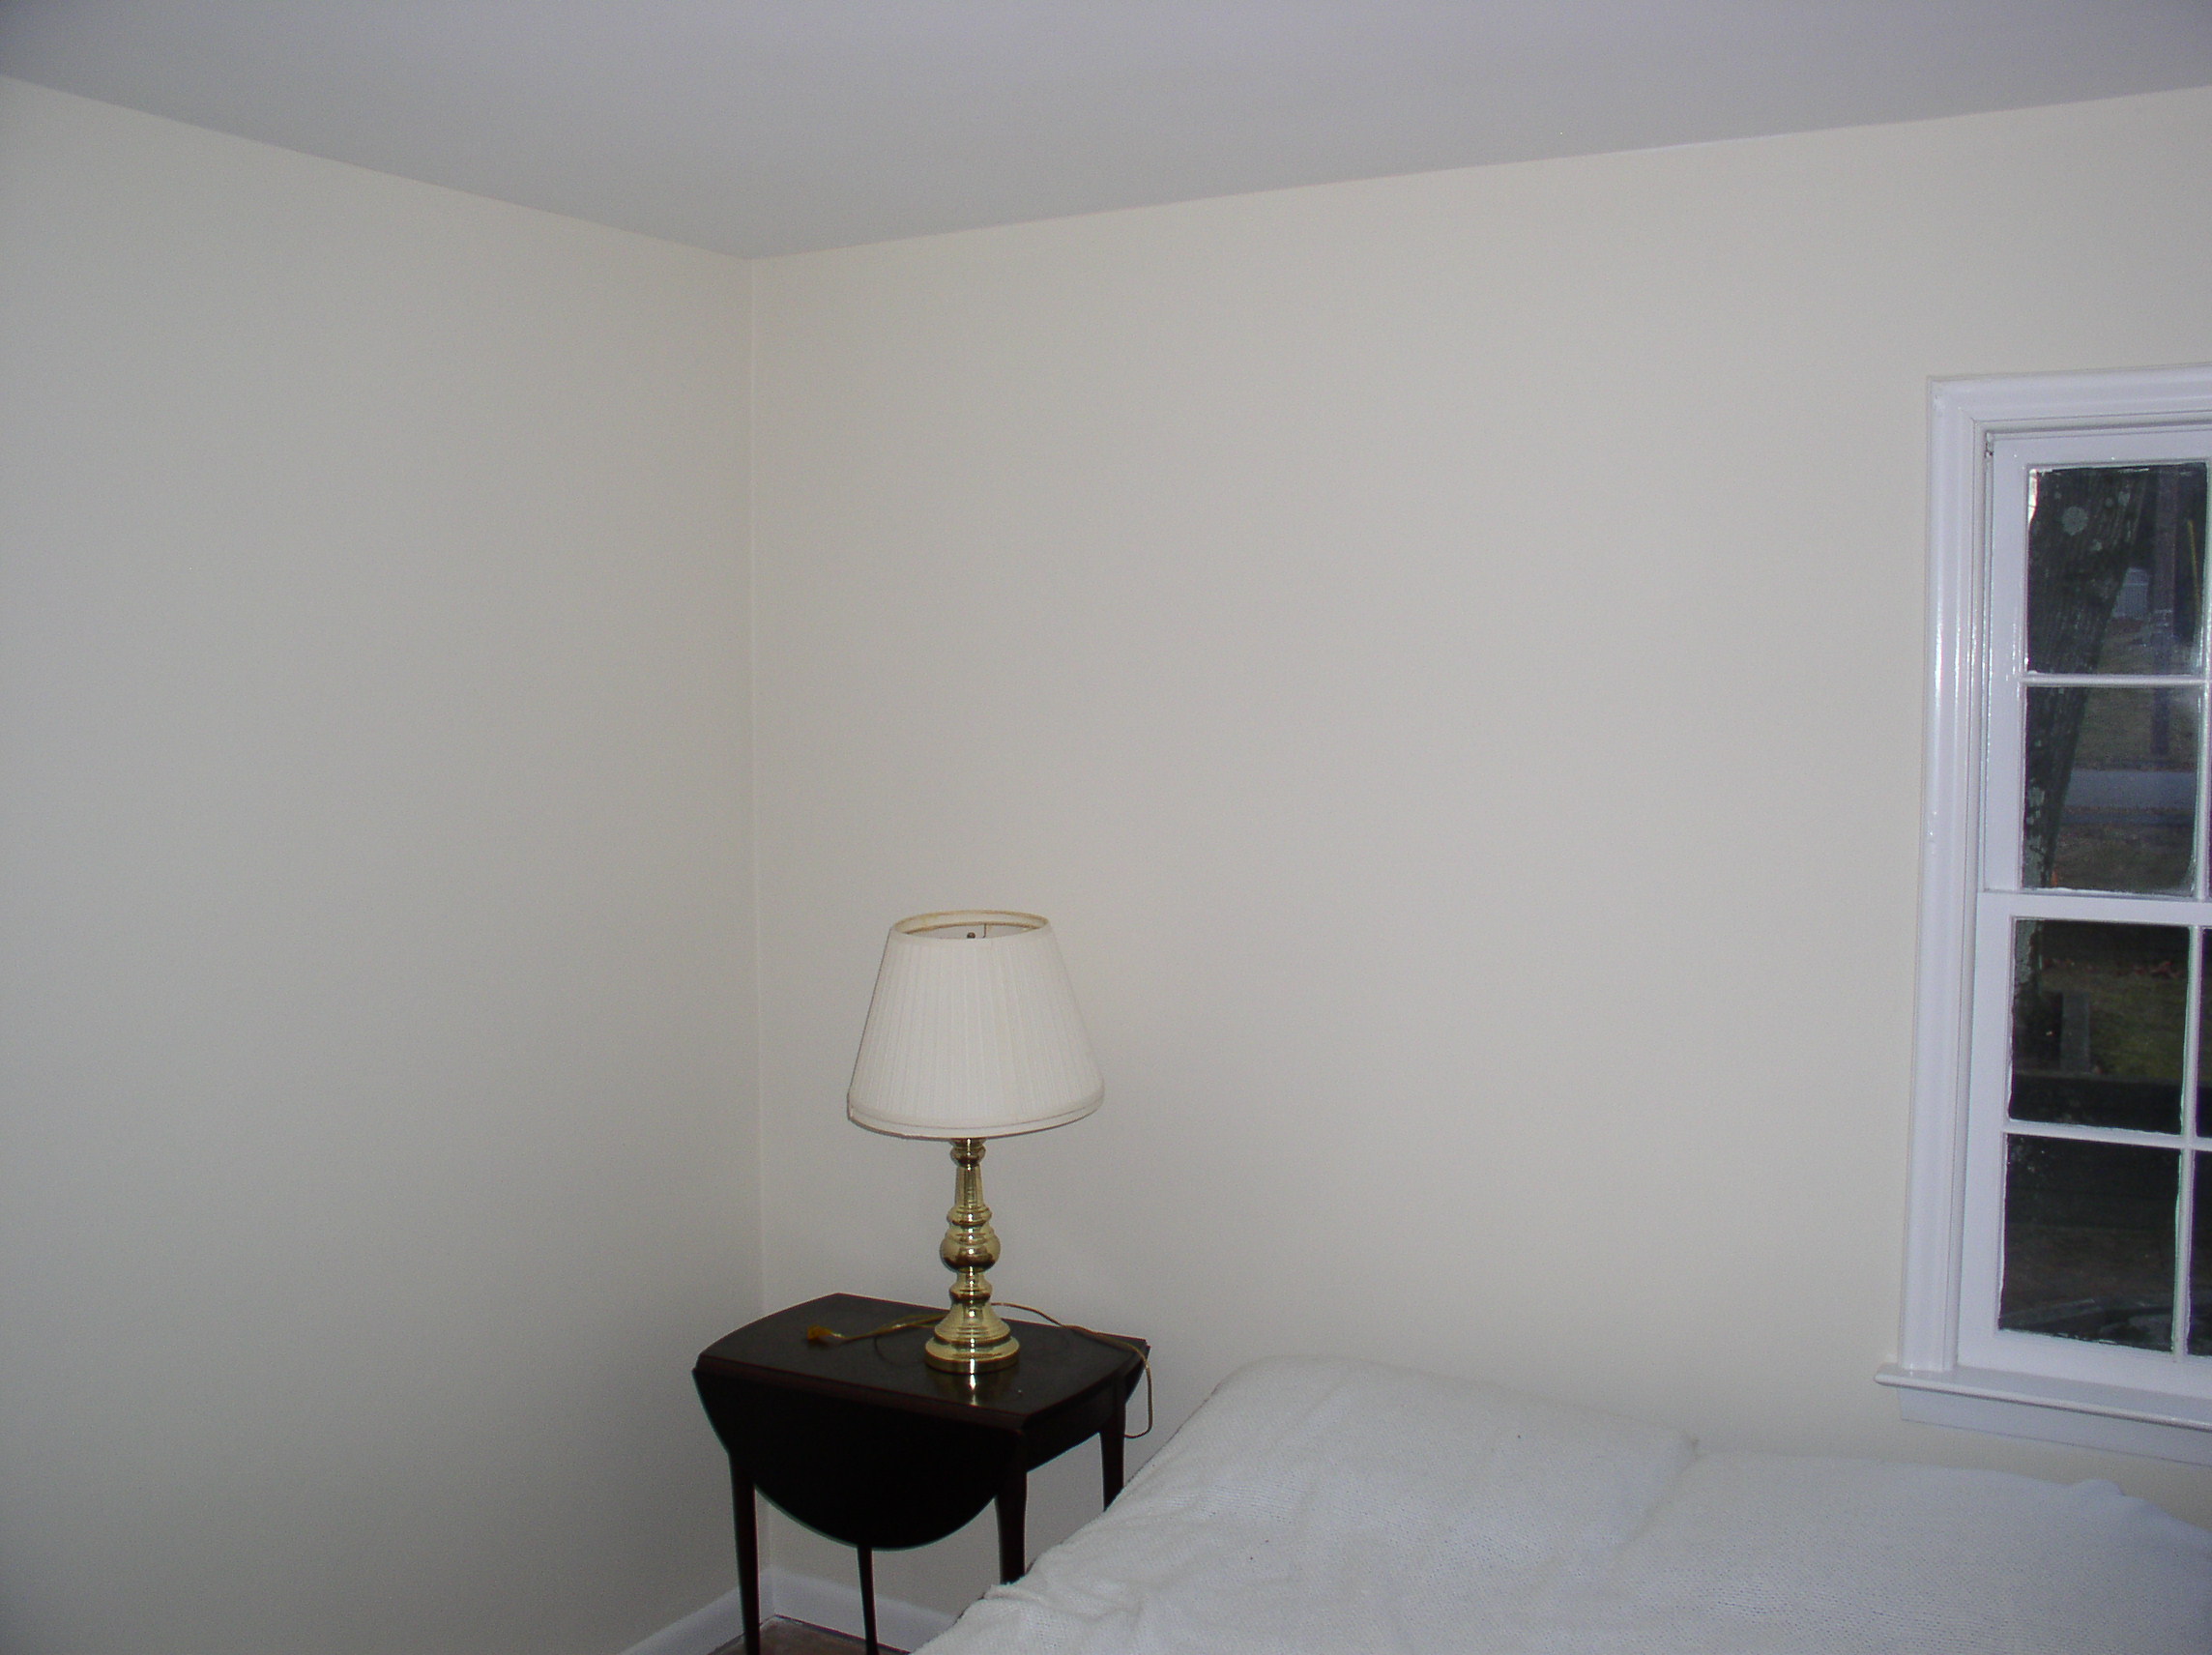 Painted Bedroom after Wallpaper Removal Morristown NJ Painting 2288x1712